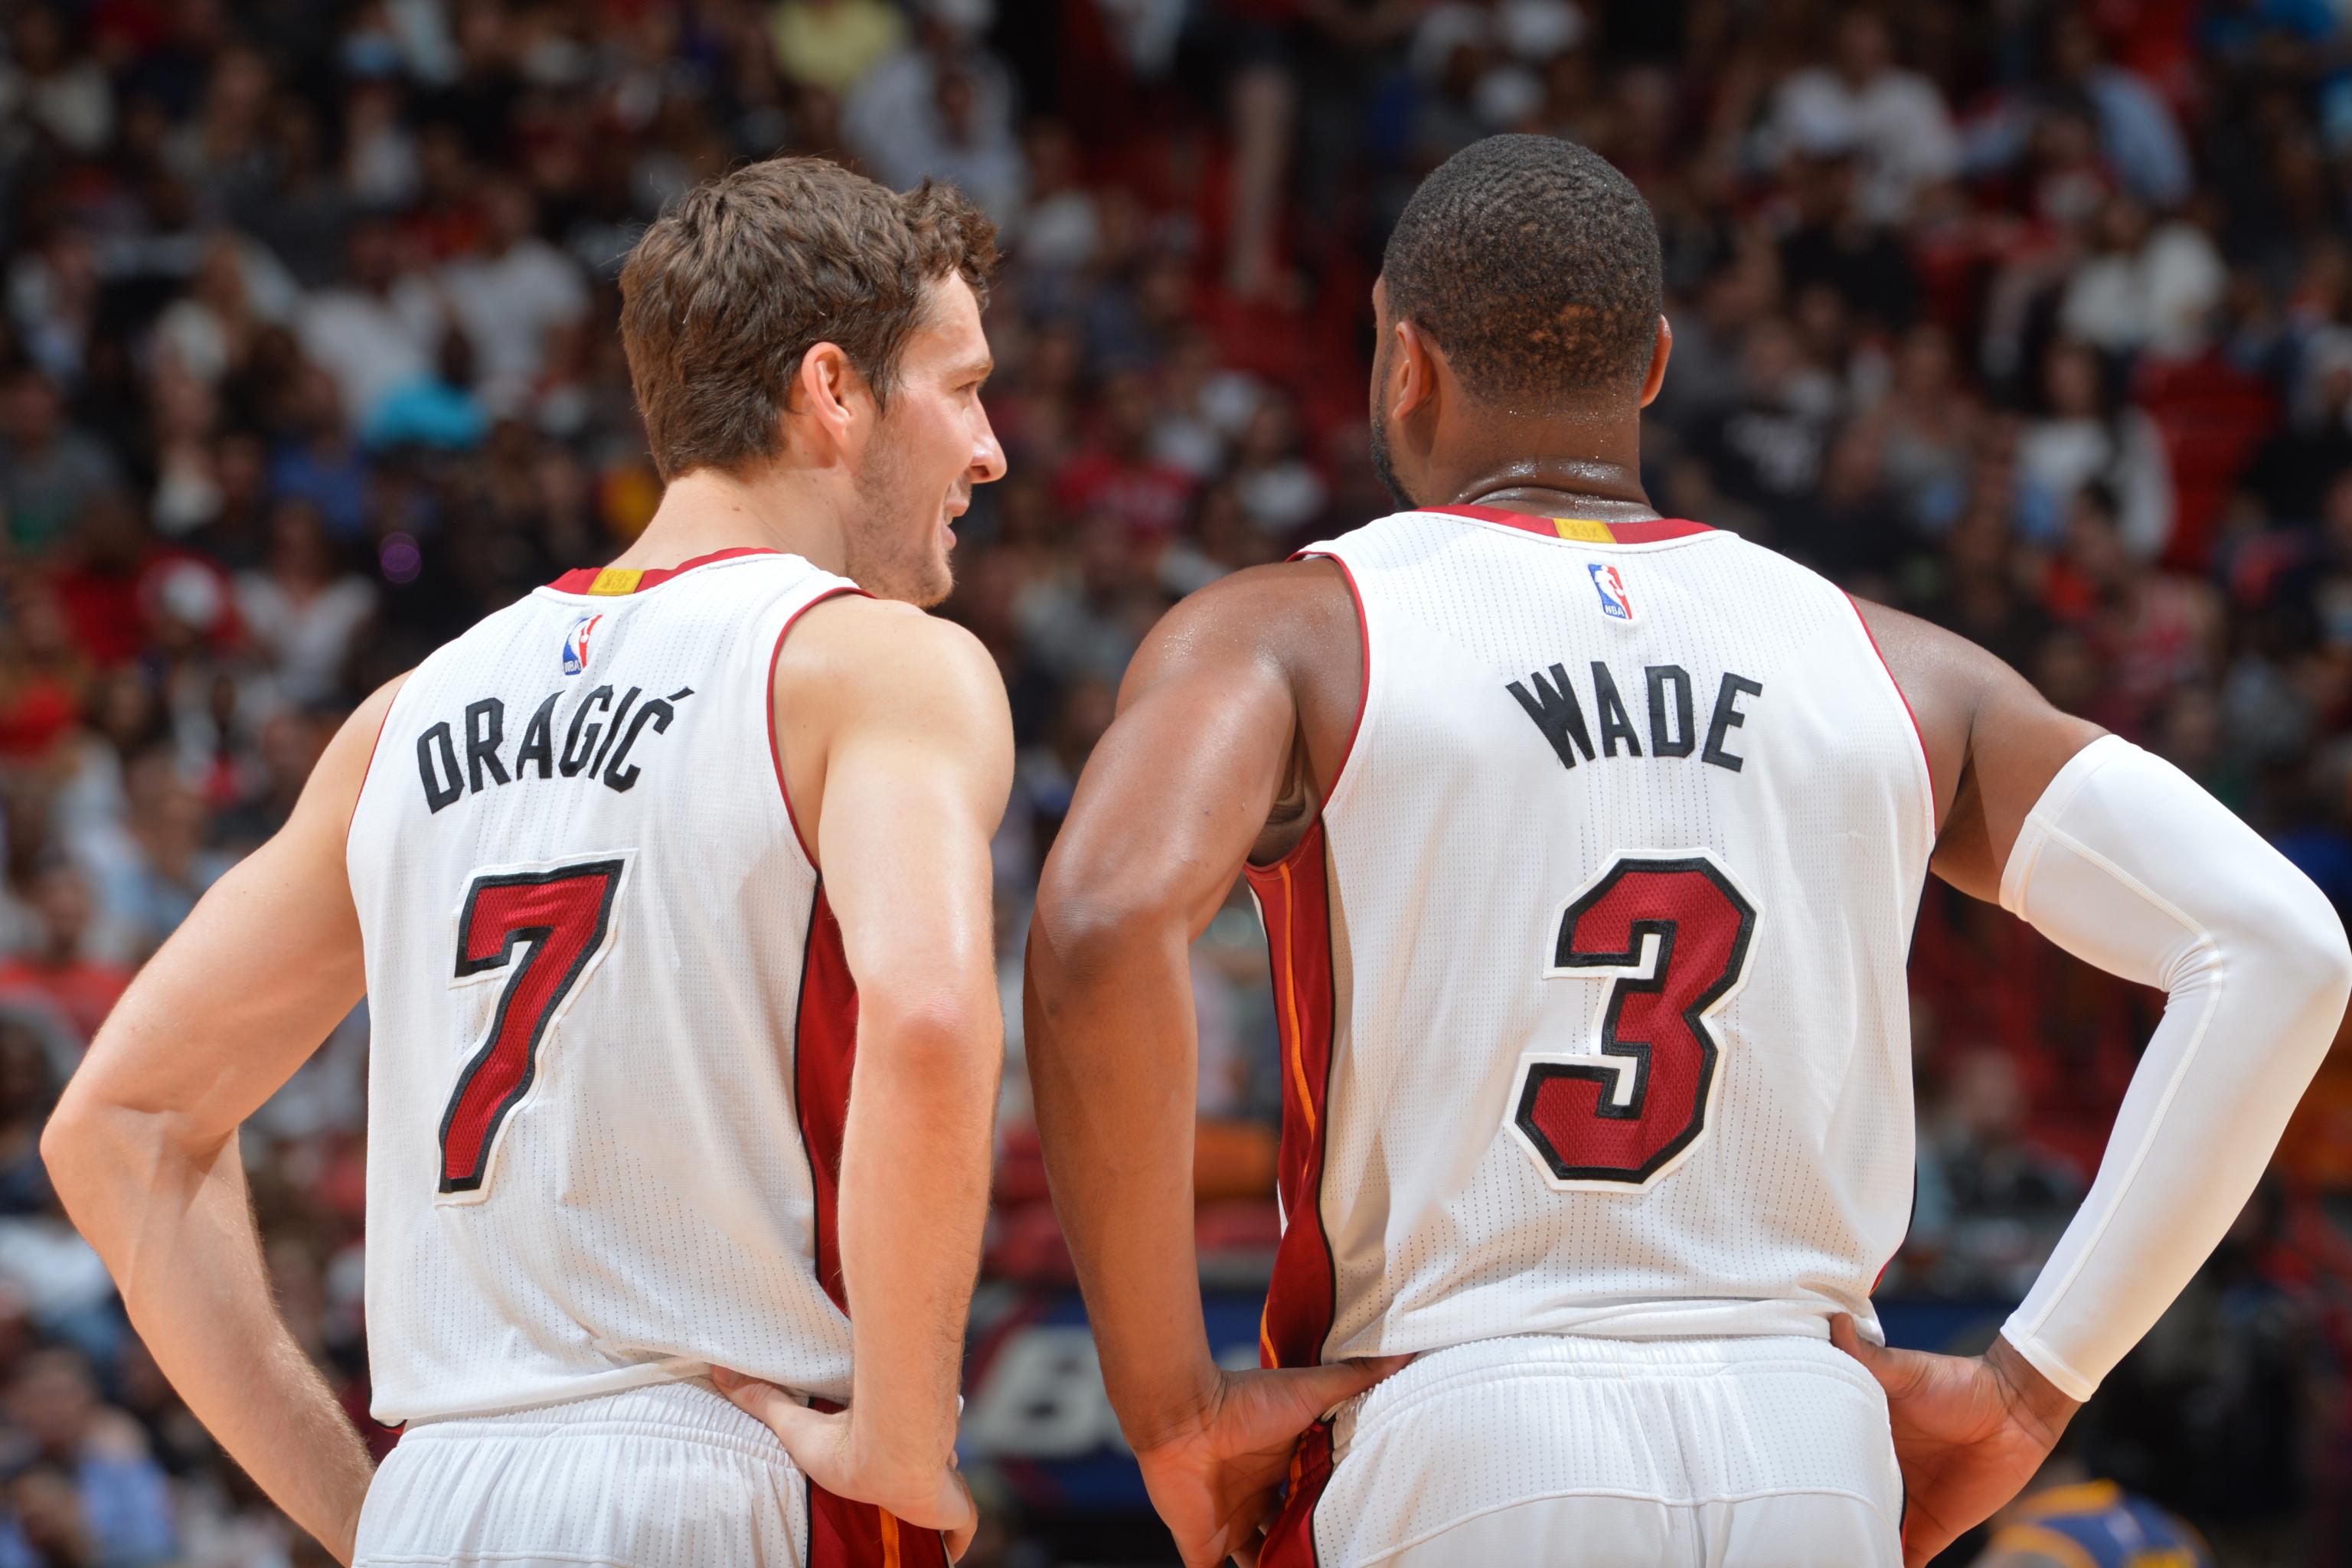 No, Heat did not disrespect Goran Dragic by giving away his jersey number